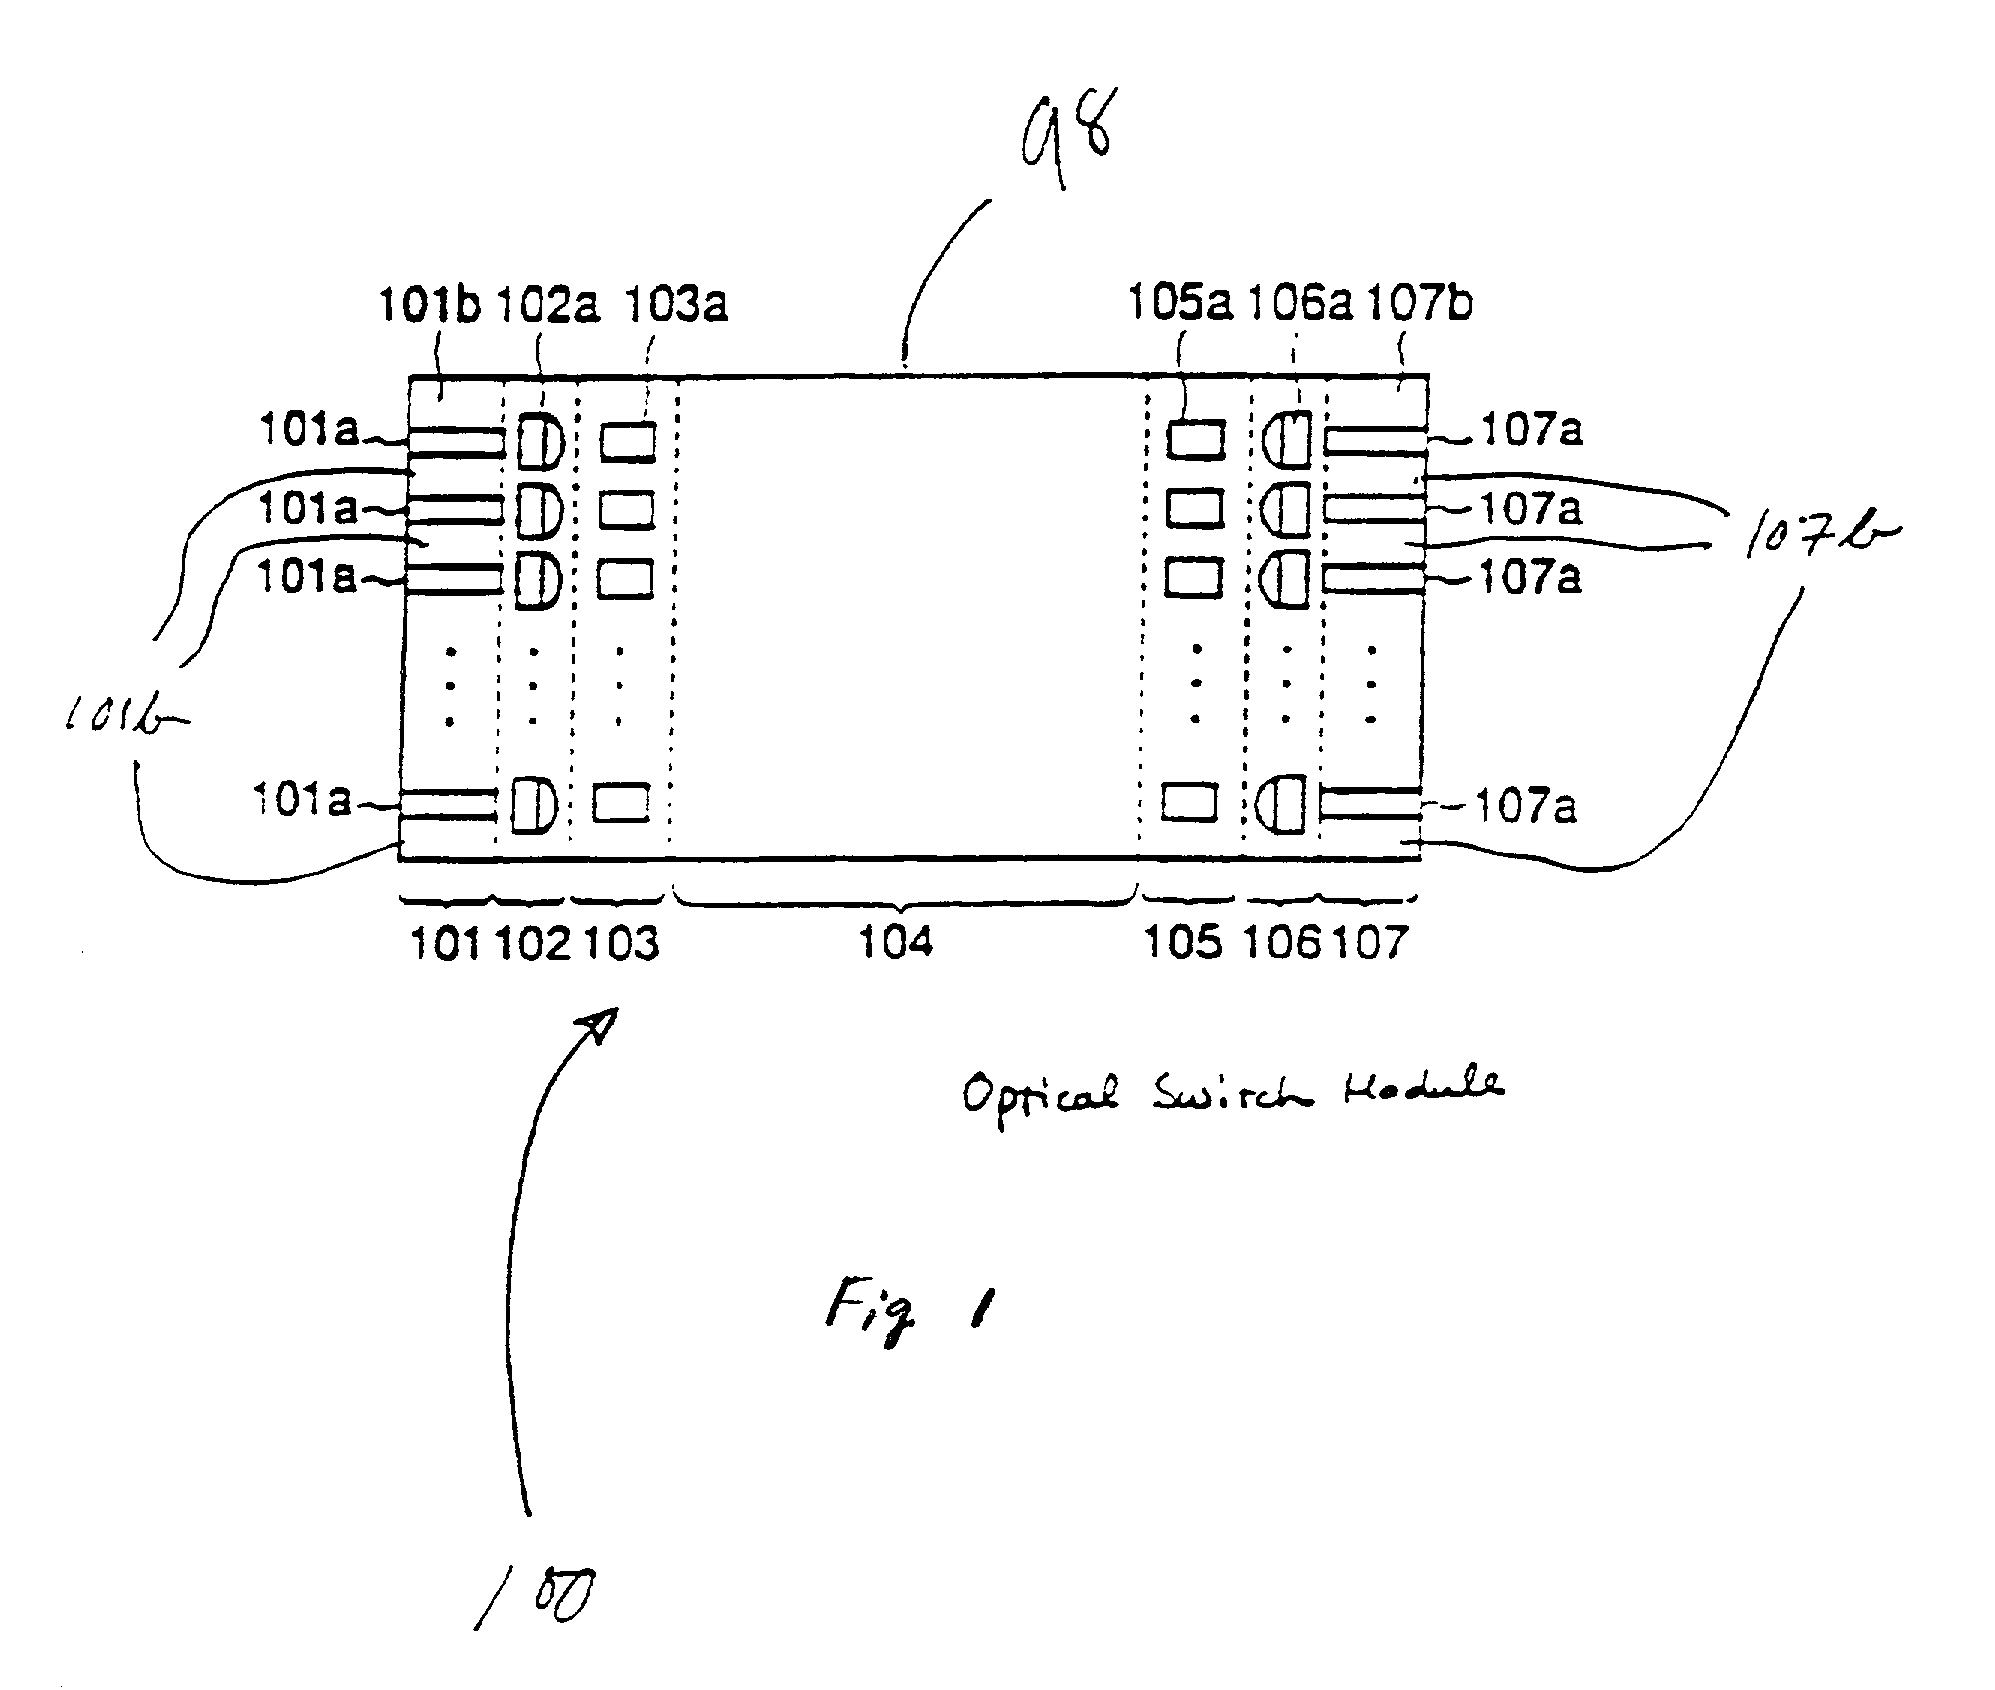 Optical switching apparatus with adiabatic coupling to optical fiber